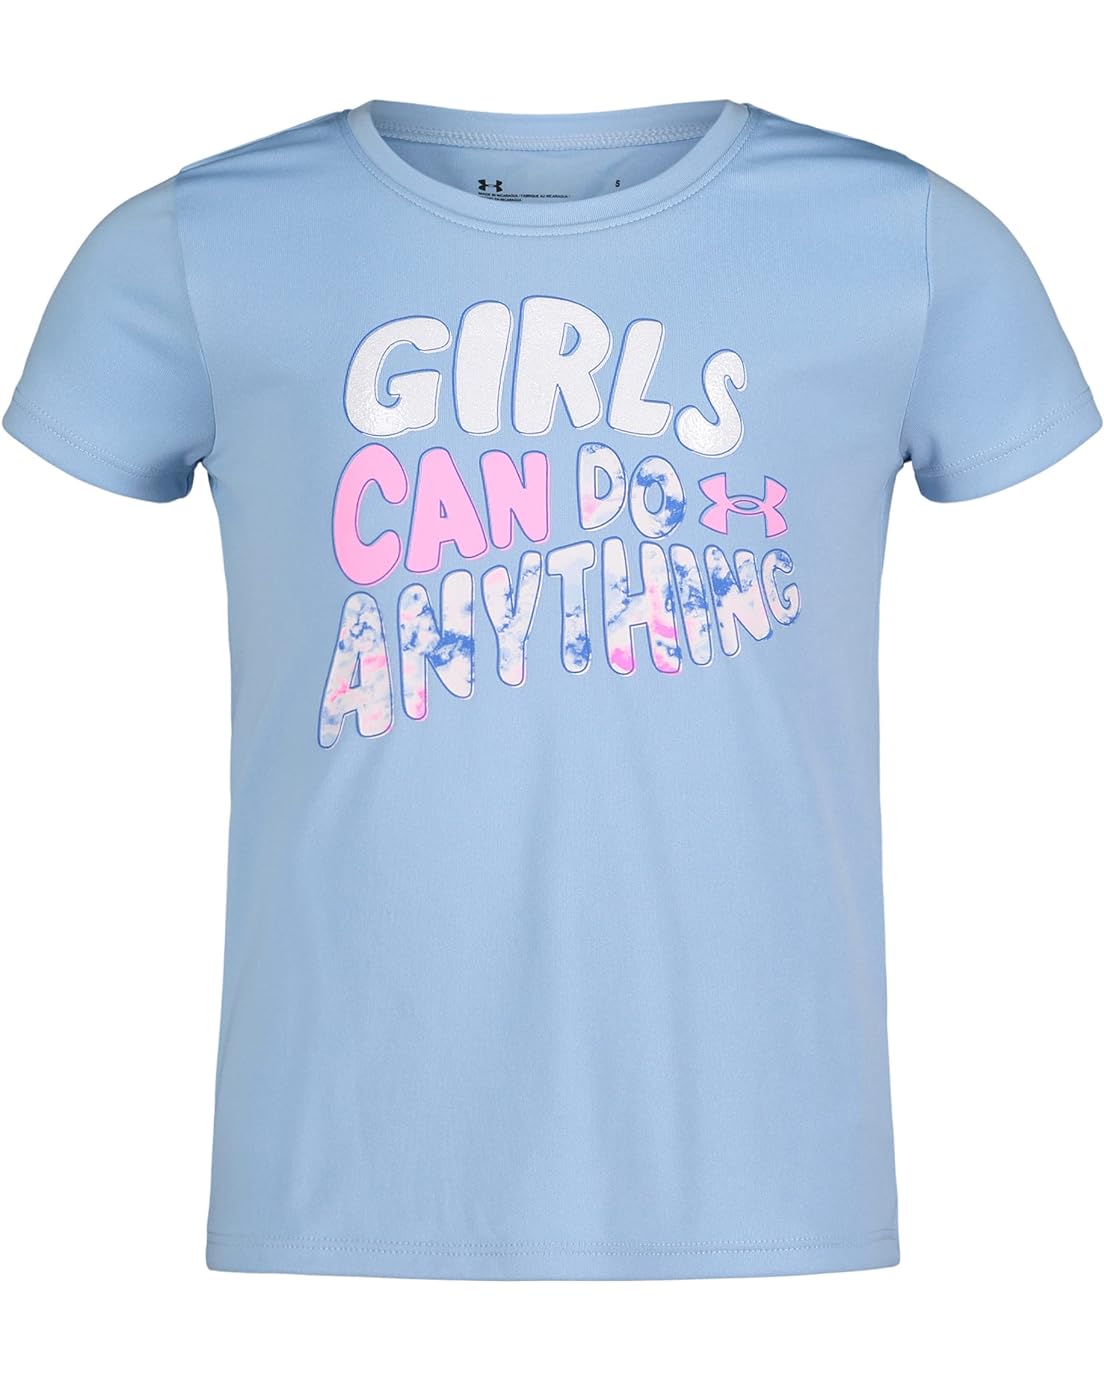 Under Armour Kids Girl Can Do Anything Short Sleeve (Little Kids)